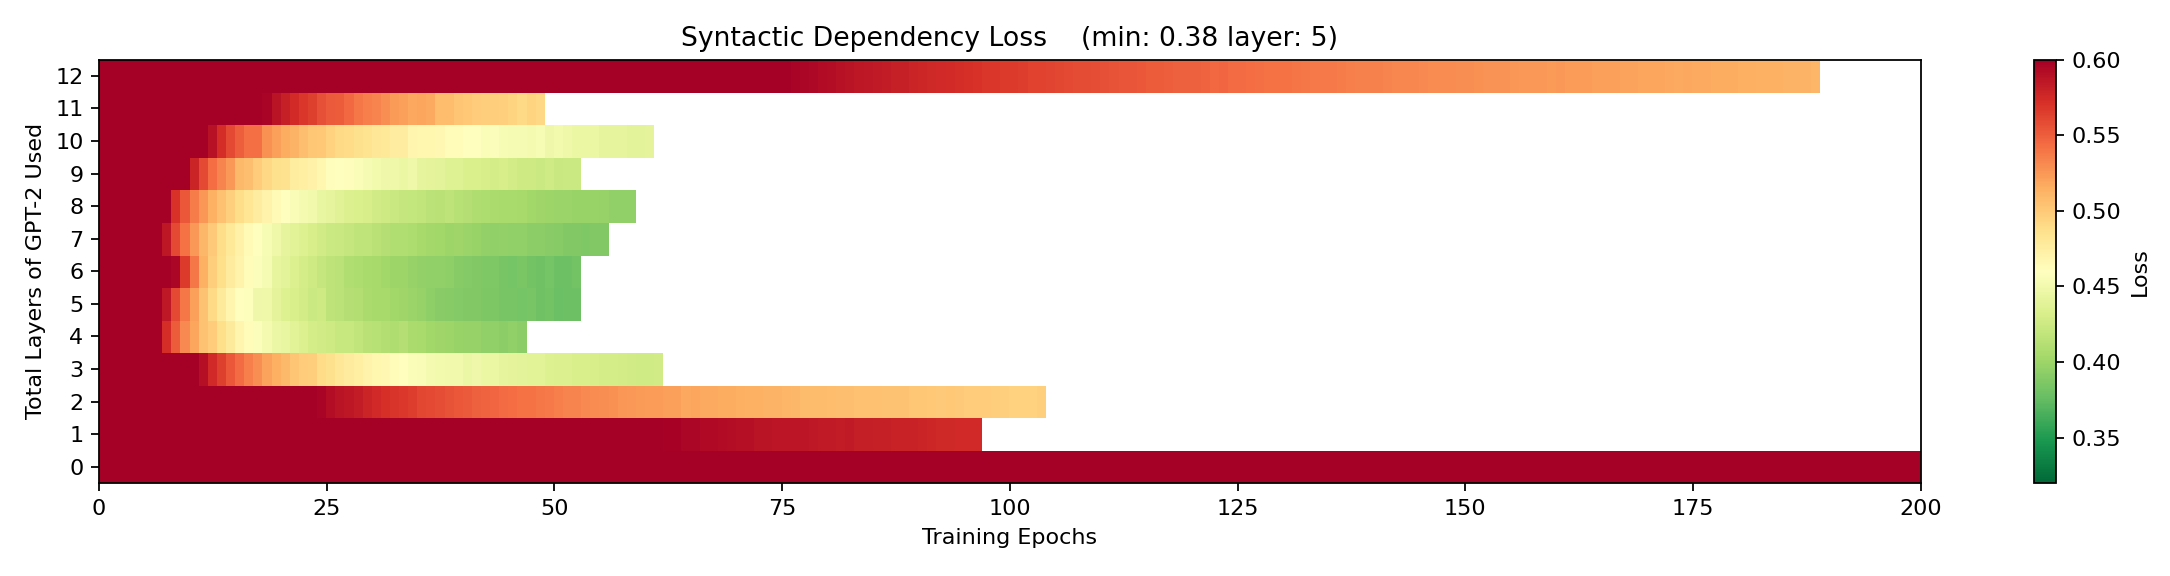 Dependency loss by layer